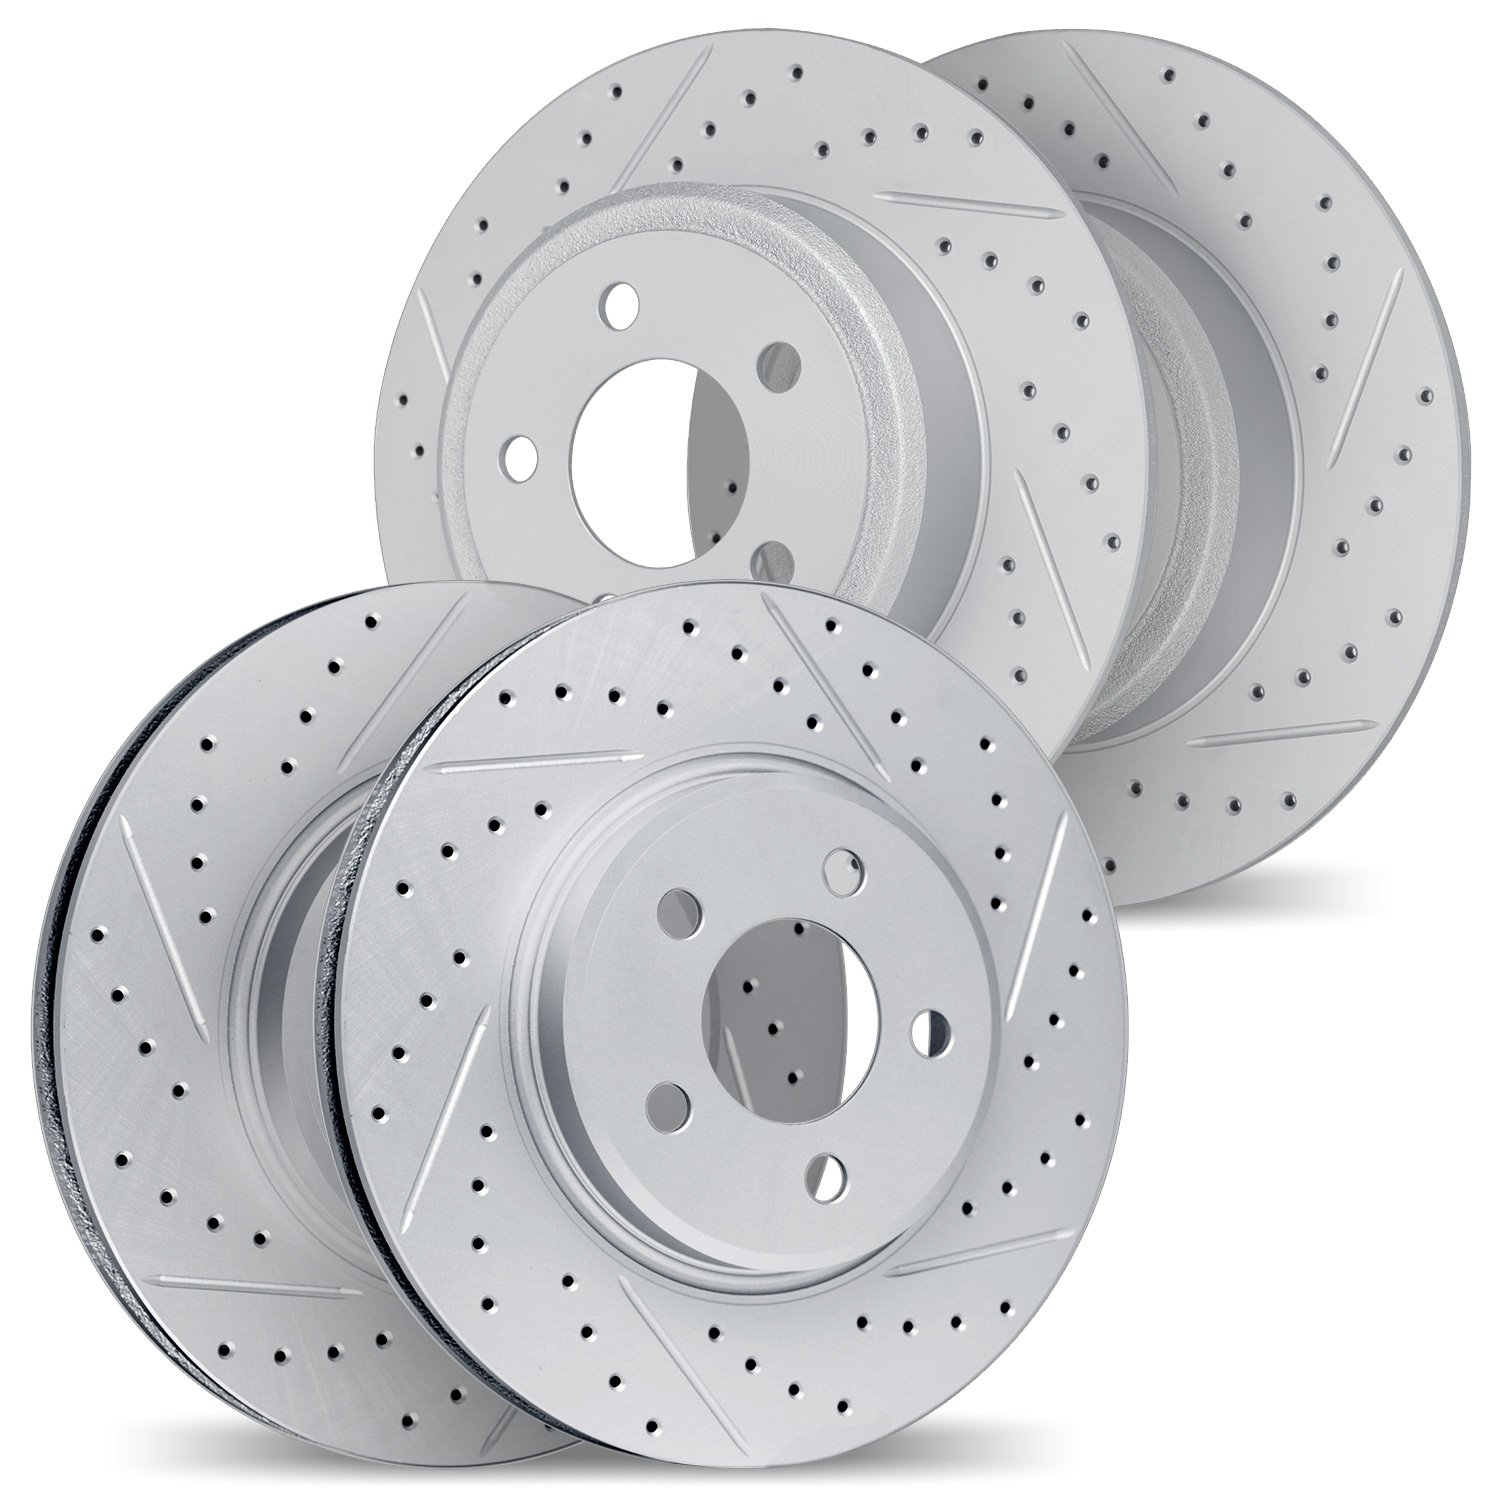 2004-73012 Geoperformance Drilled/Slotted Brake Rotors, 2000-2008 Audi/Volkswagen, Position: Front and Rear